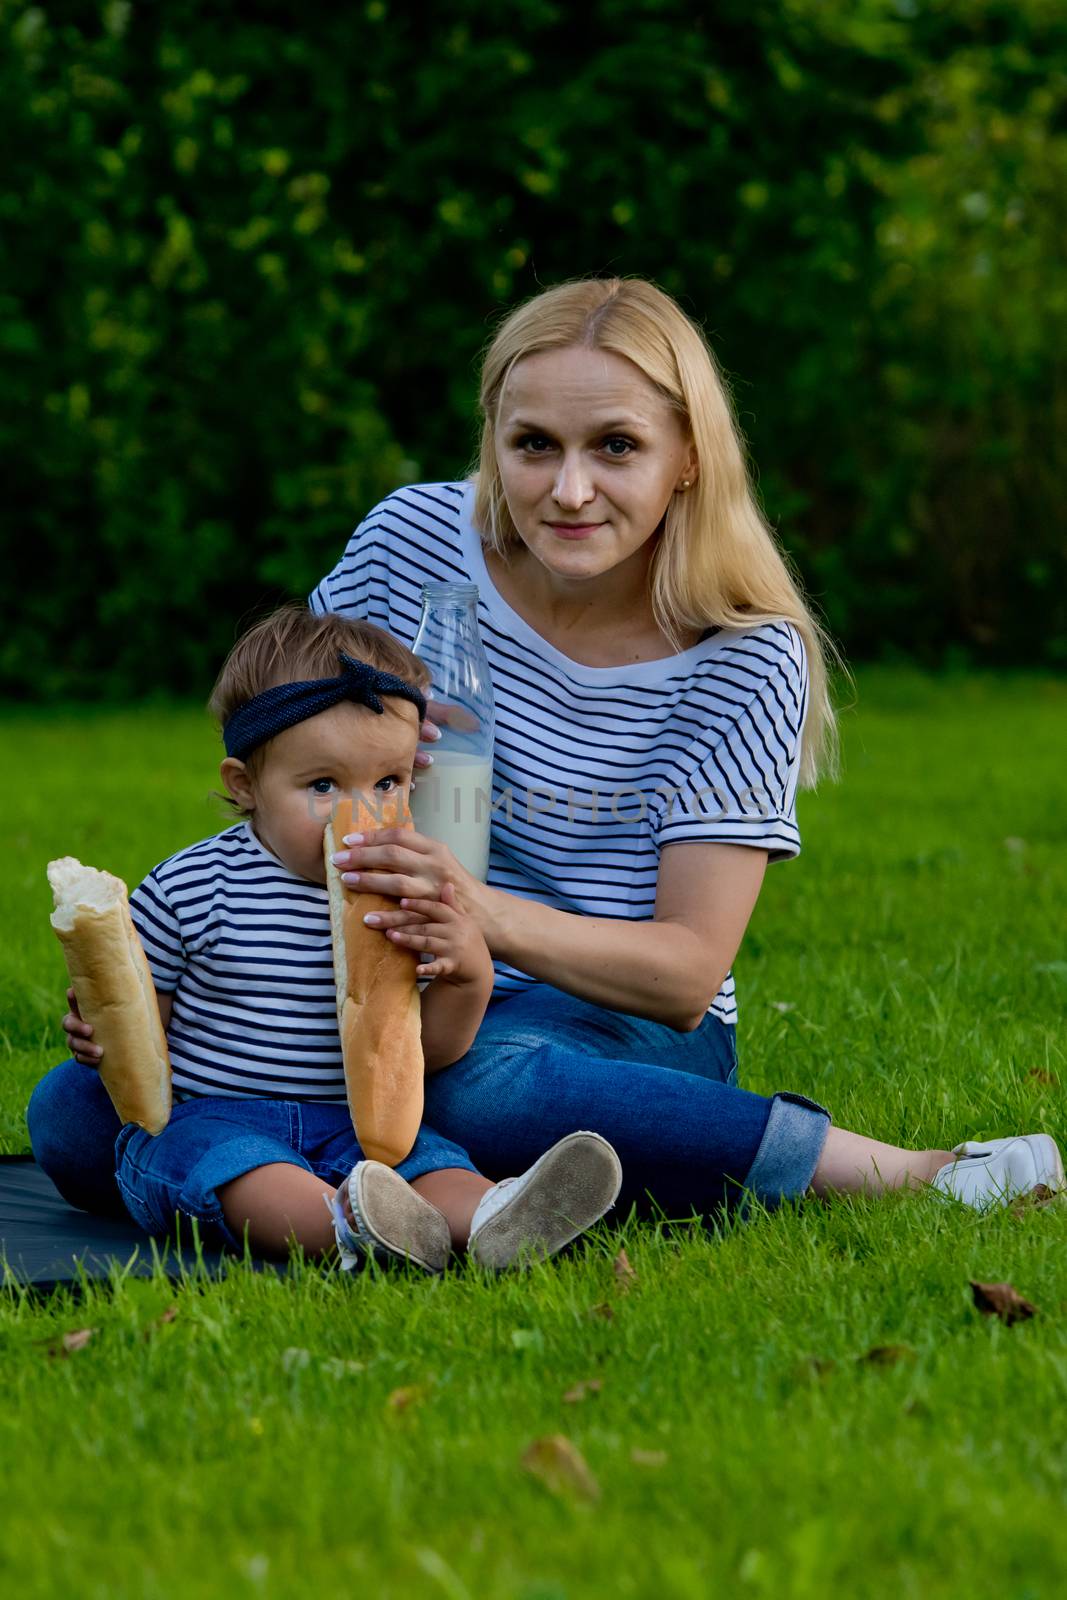 A young woman in jeans and a striped T-shirt gives her daughter a fresh baguette to eat. Family picnic.